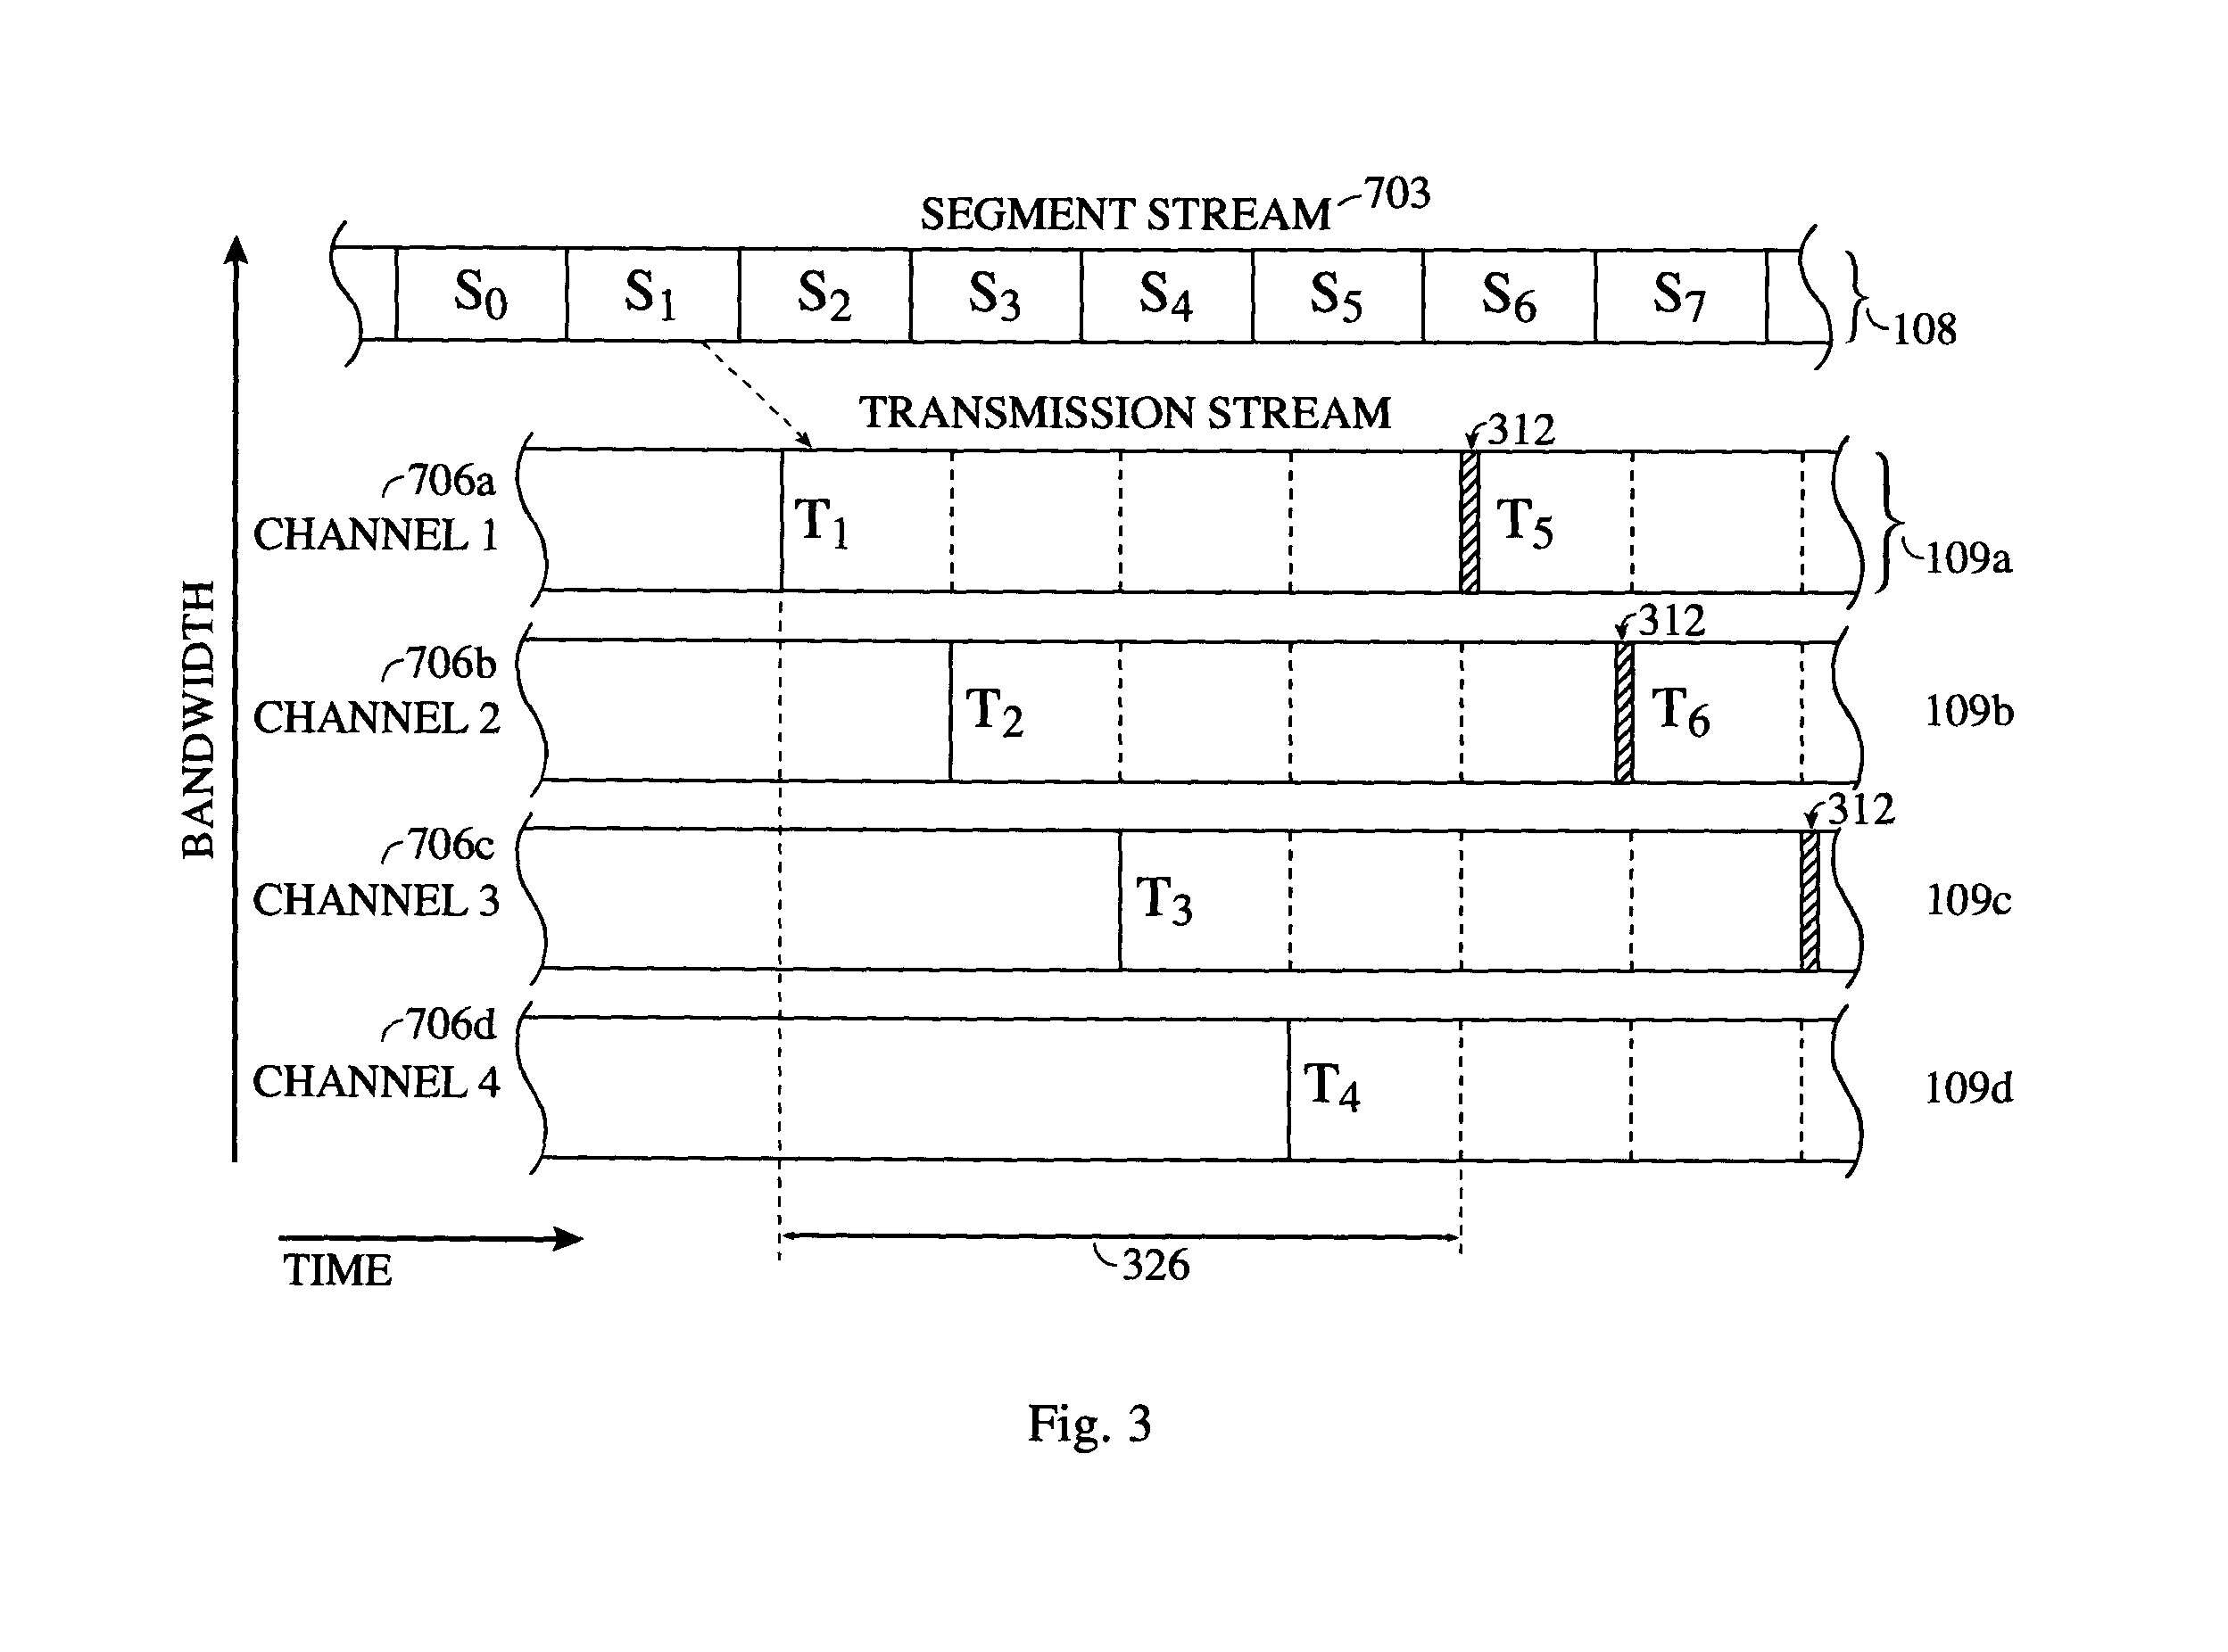 System and method for reliably communicating the content of a live data stream